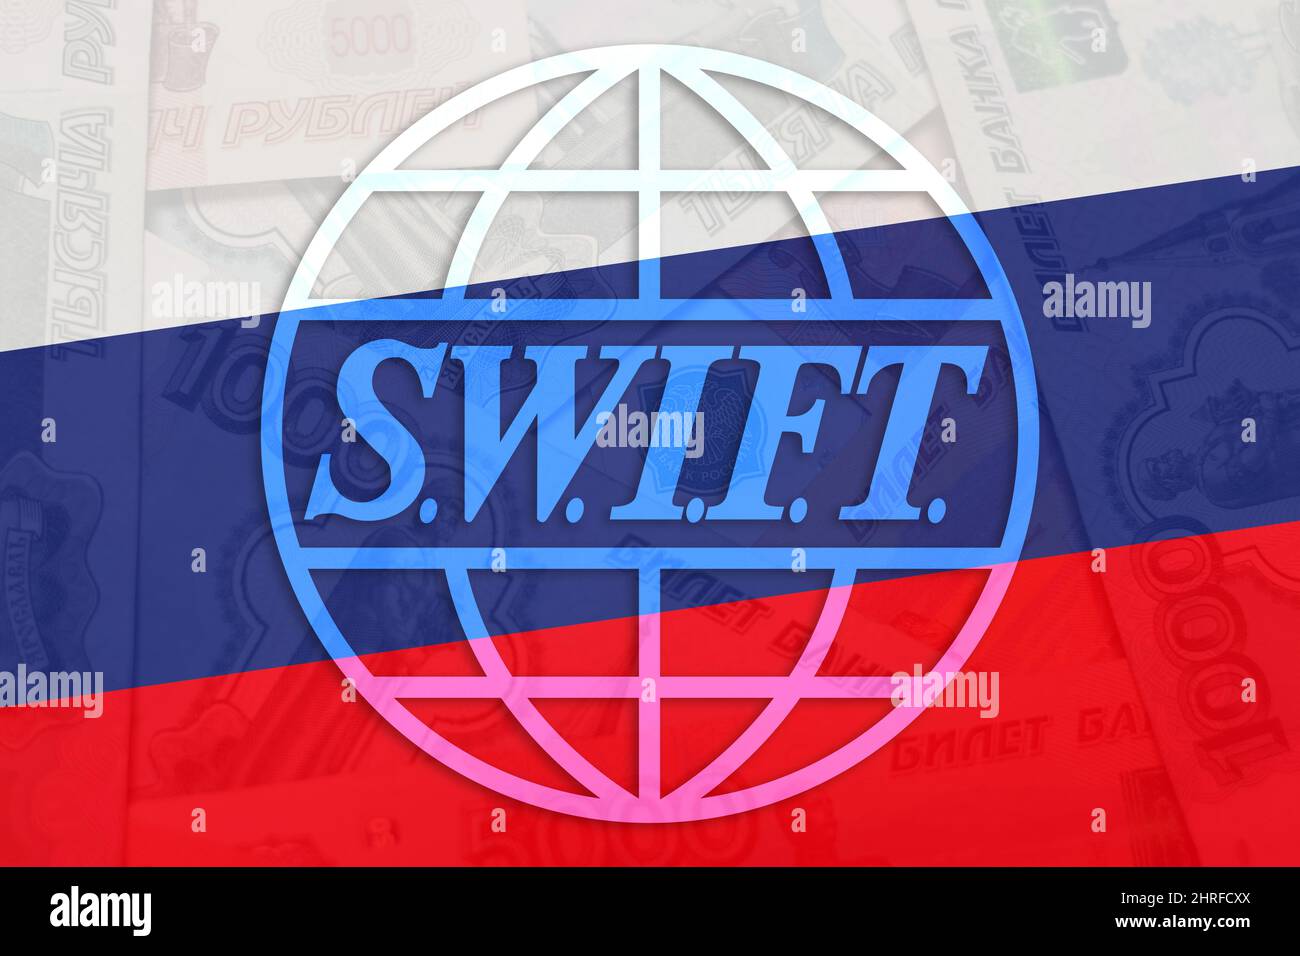 Swift payment system and Russian flag. Economic and financial banking sanctions for Russia. Stock Photo